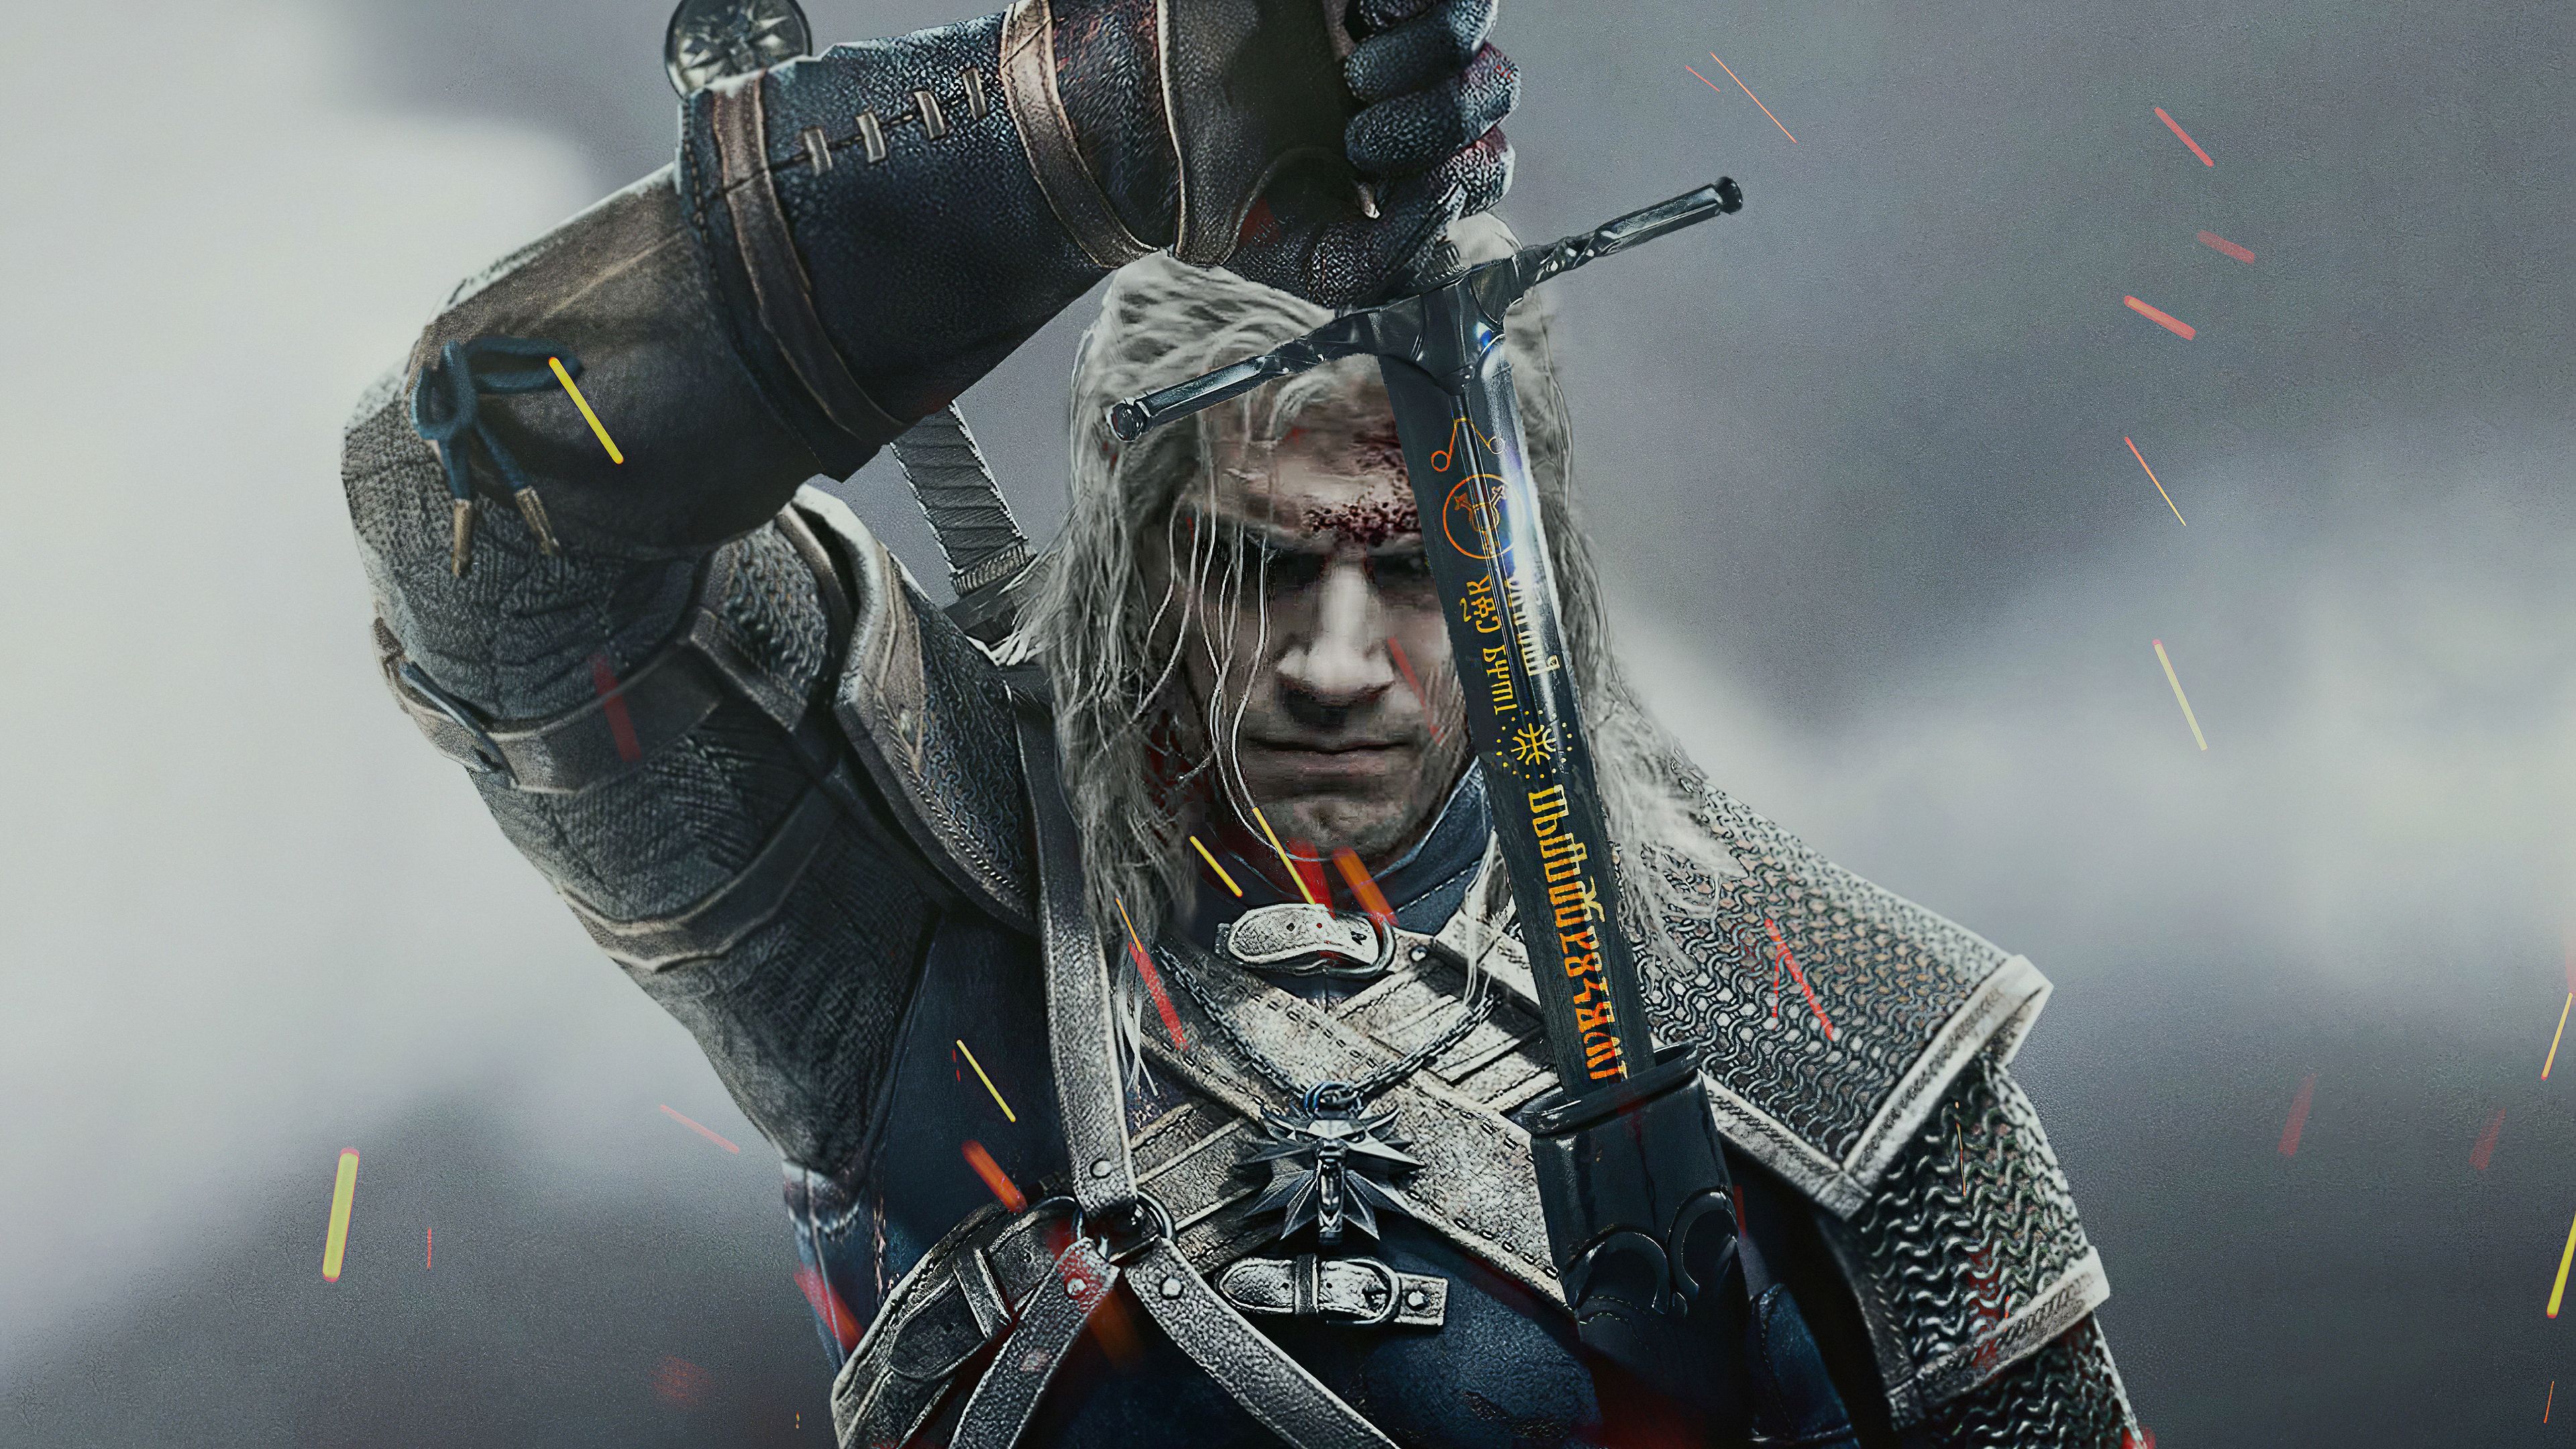 The Witcher Henry The Witcher HD wallpaper, The Witcher background HD 4k, The Witcher 4k wallpaper. The witcher, Netflix tv, Tv series